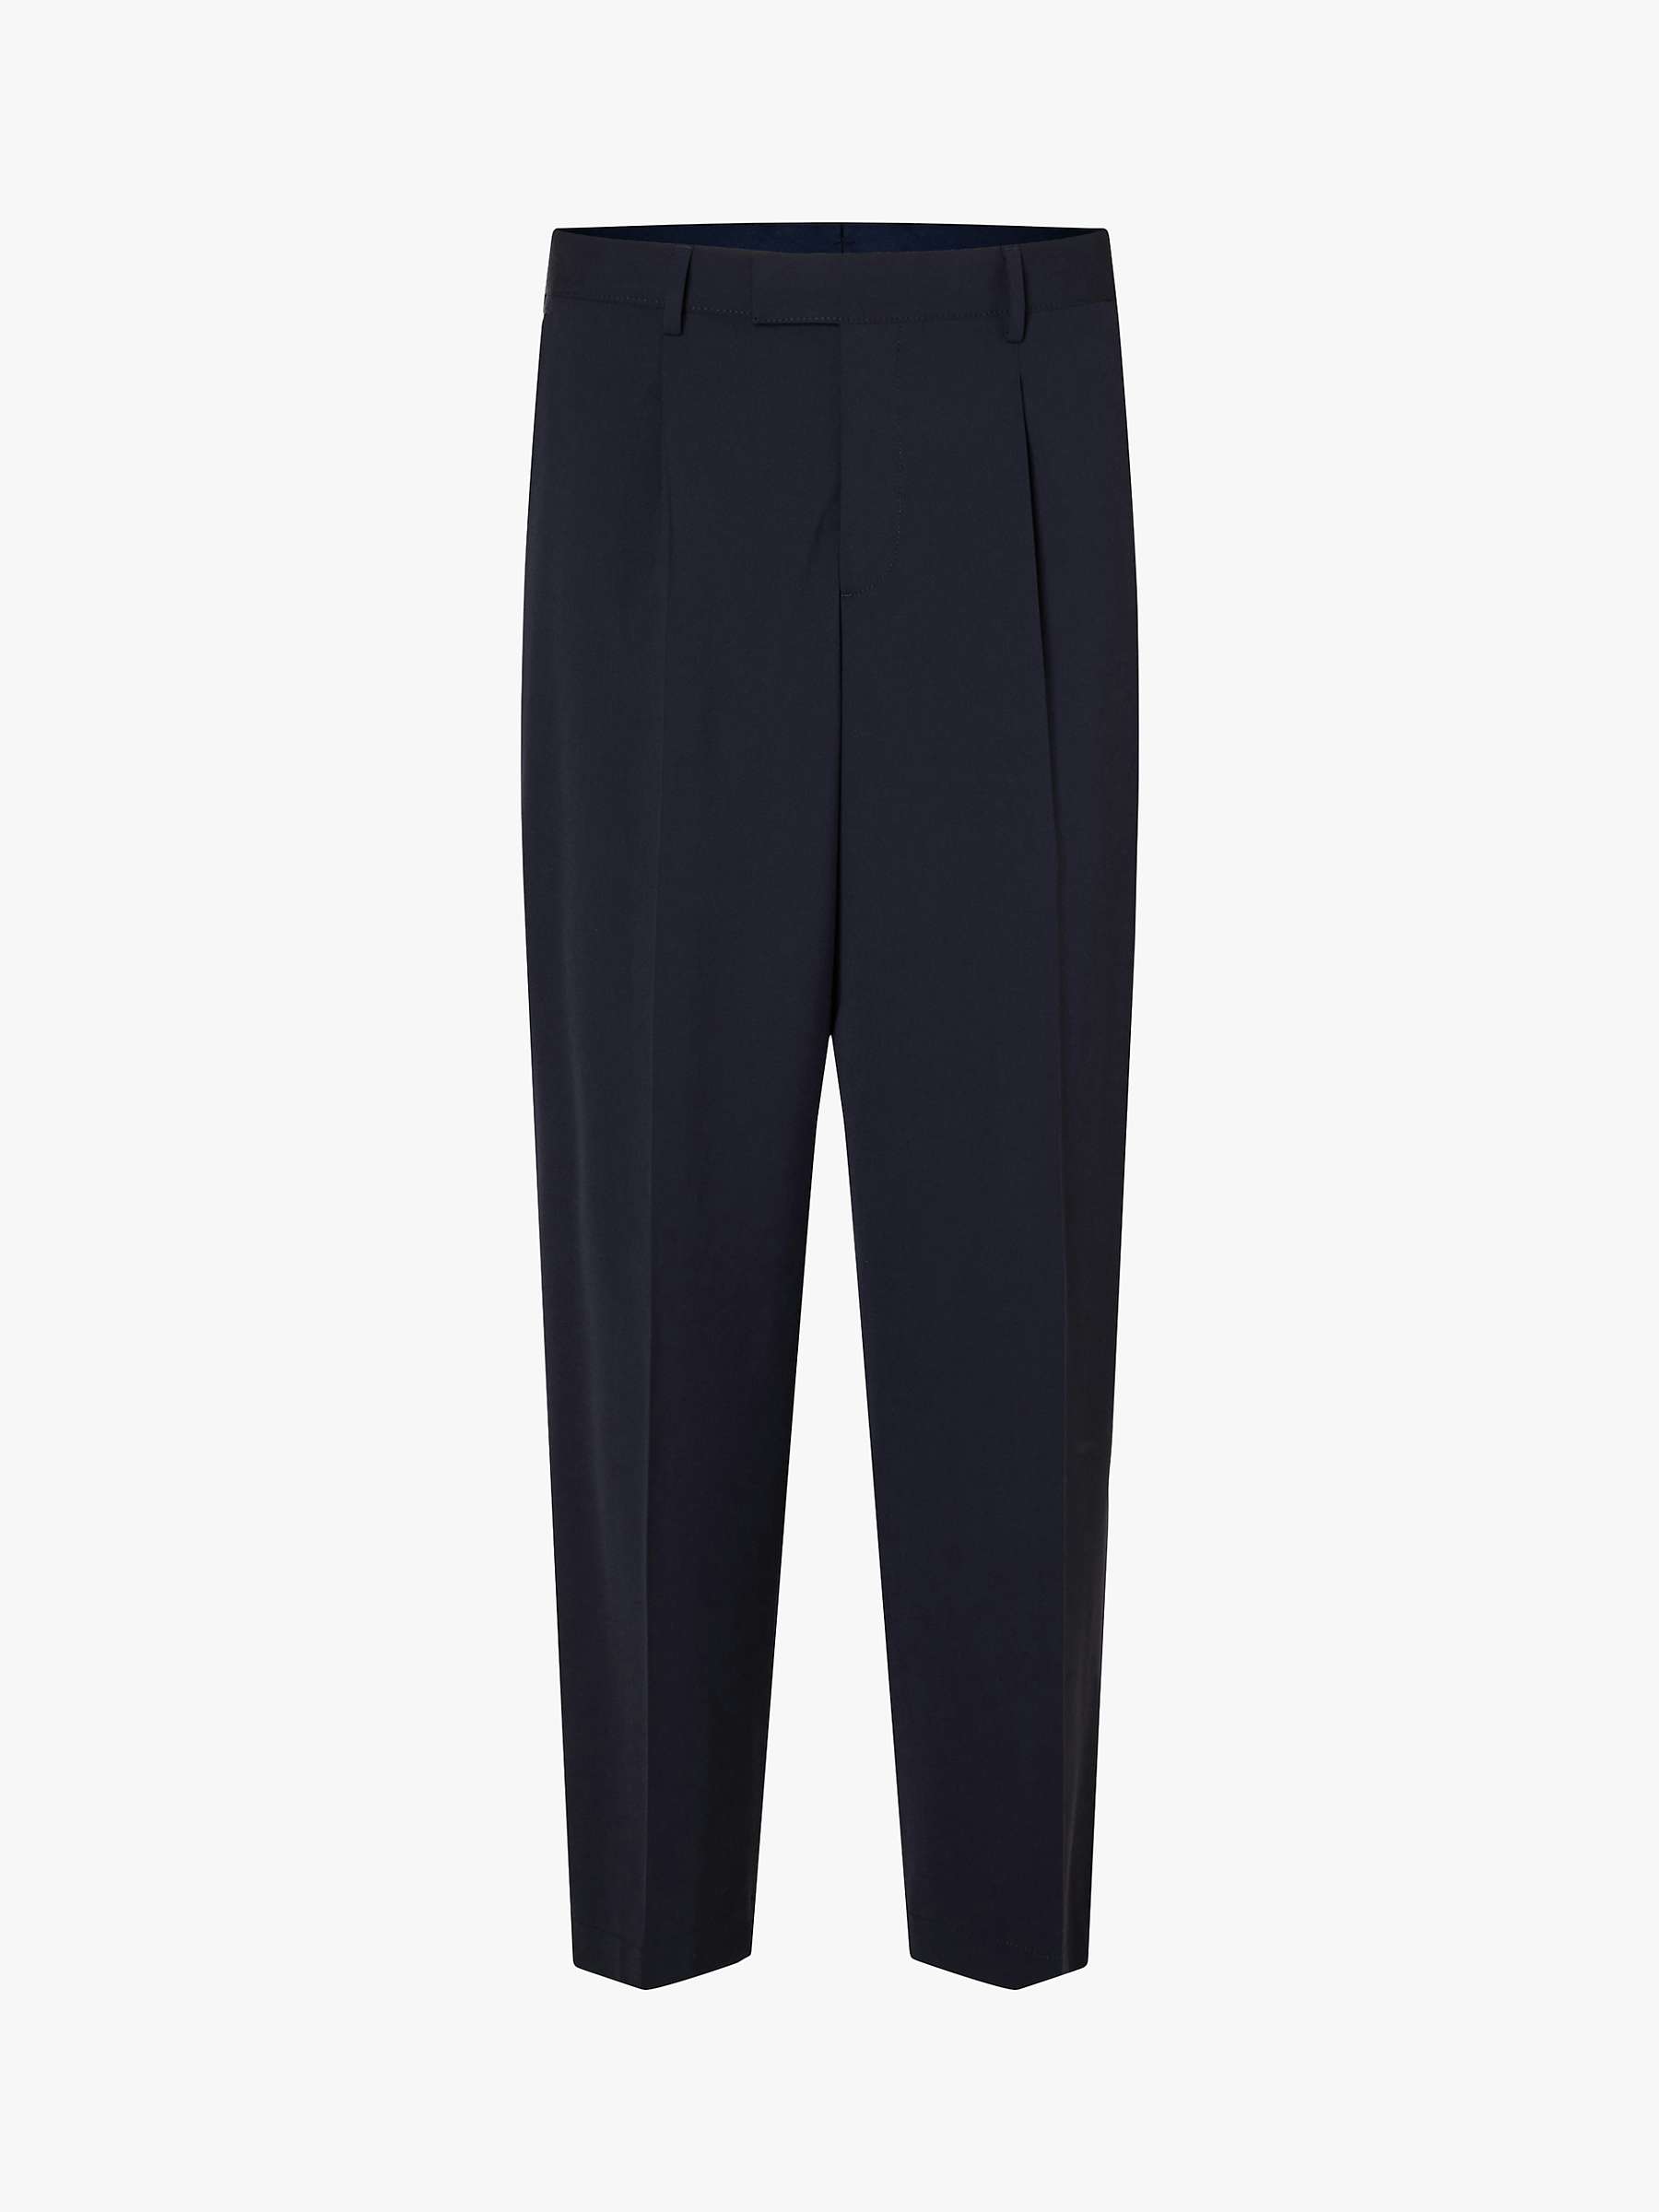 Buy SELECTED HOMME Tailored Fit Trousers, Dark Navy Online at johnlewis.com